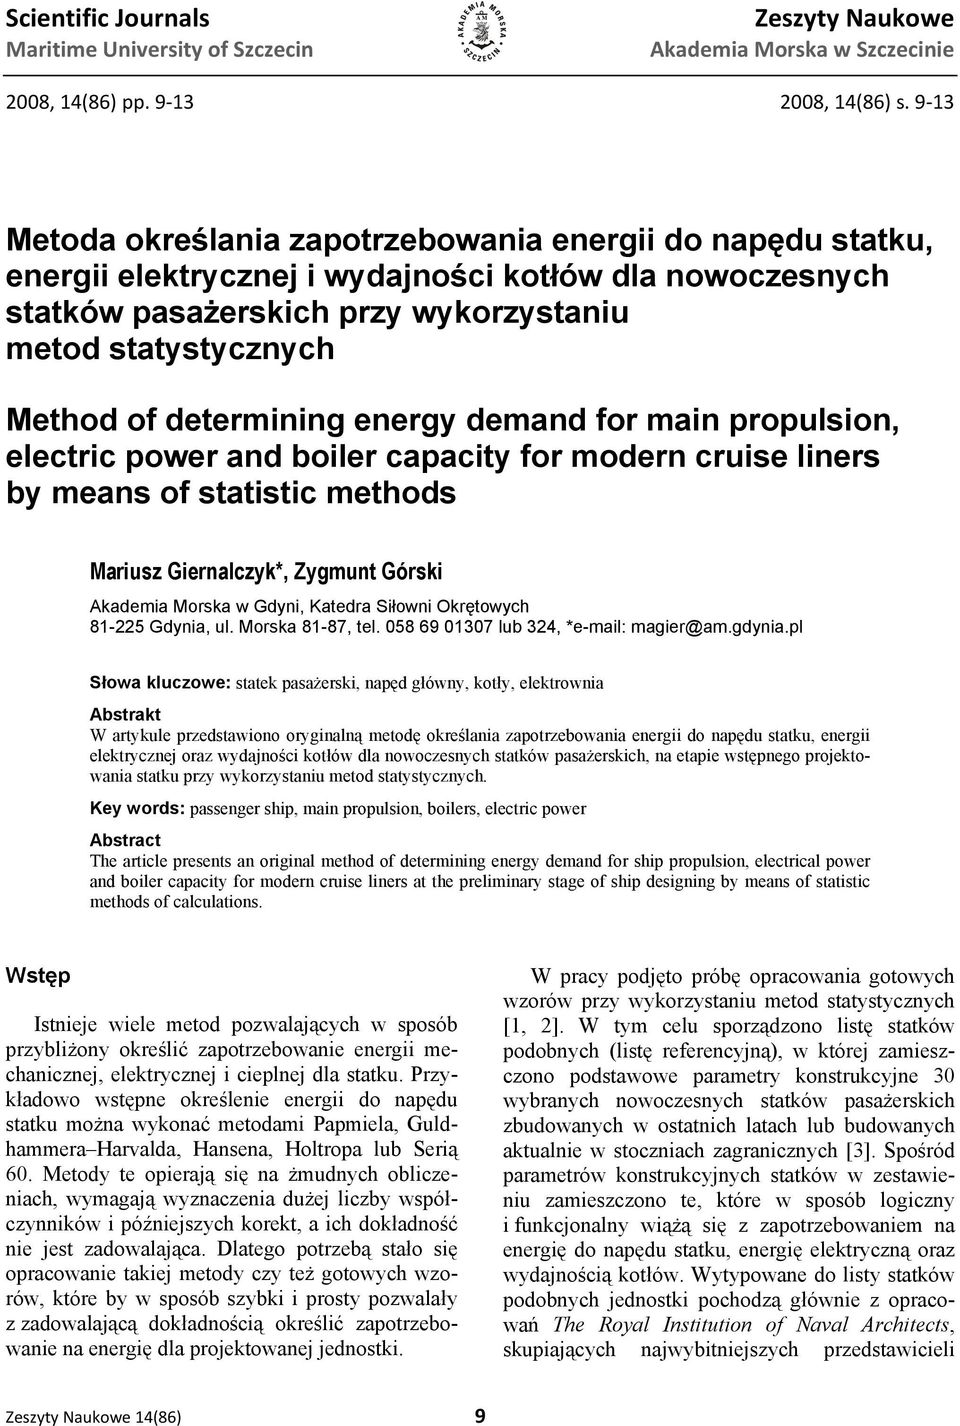 determining energy demand for main propulsion, electric power and boiler capacity for modern cruise liners by means of statistic methods Mariusz Giernalczyk*, Zygmunt Górski Akademia Morska w Gdyni,